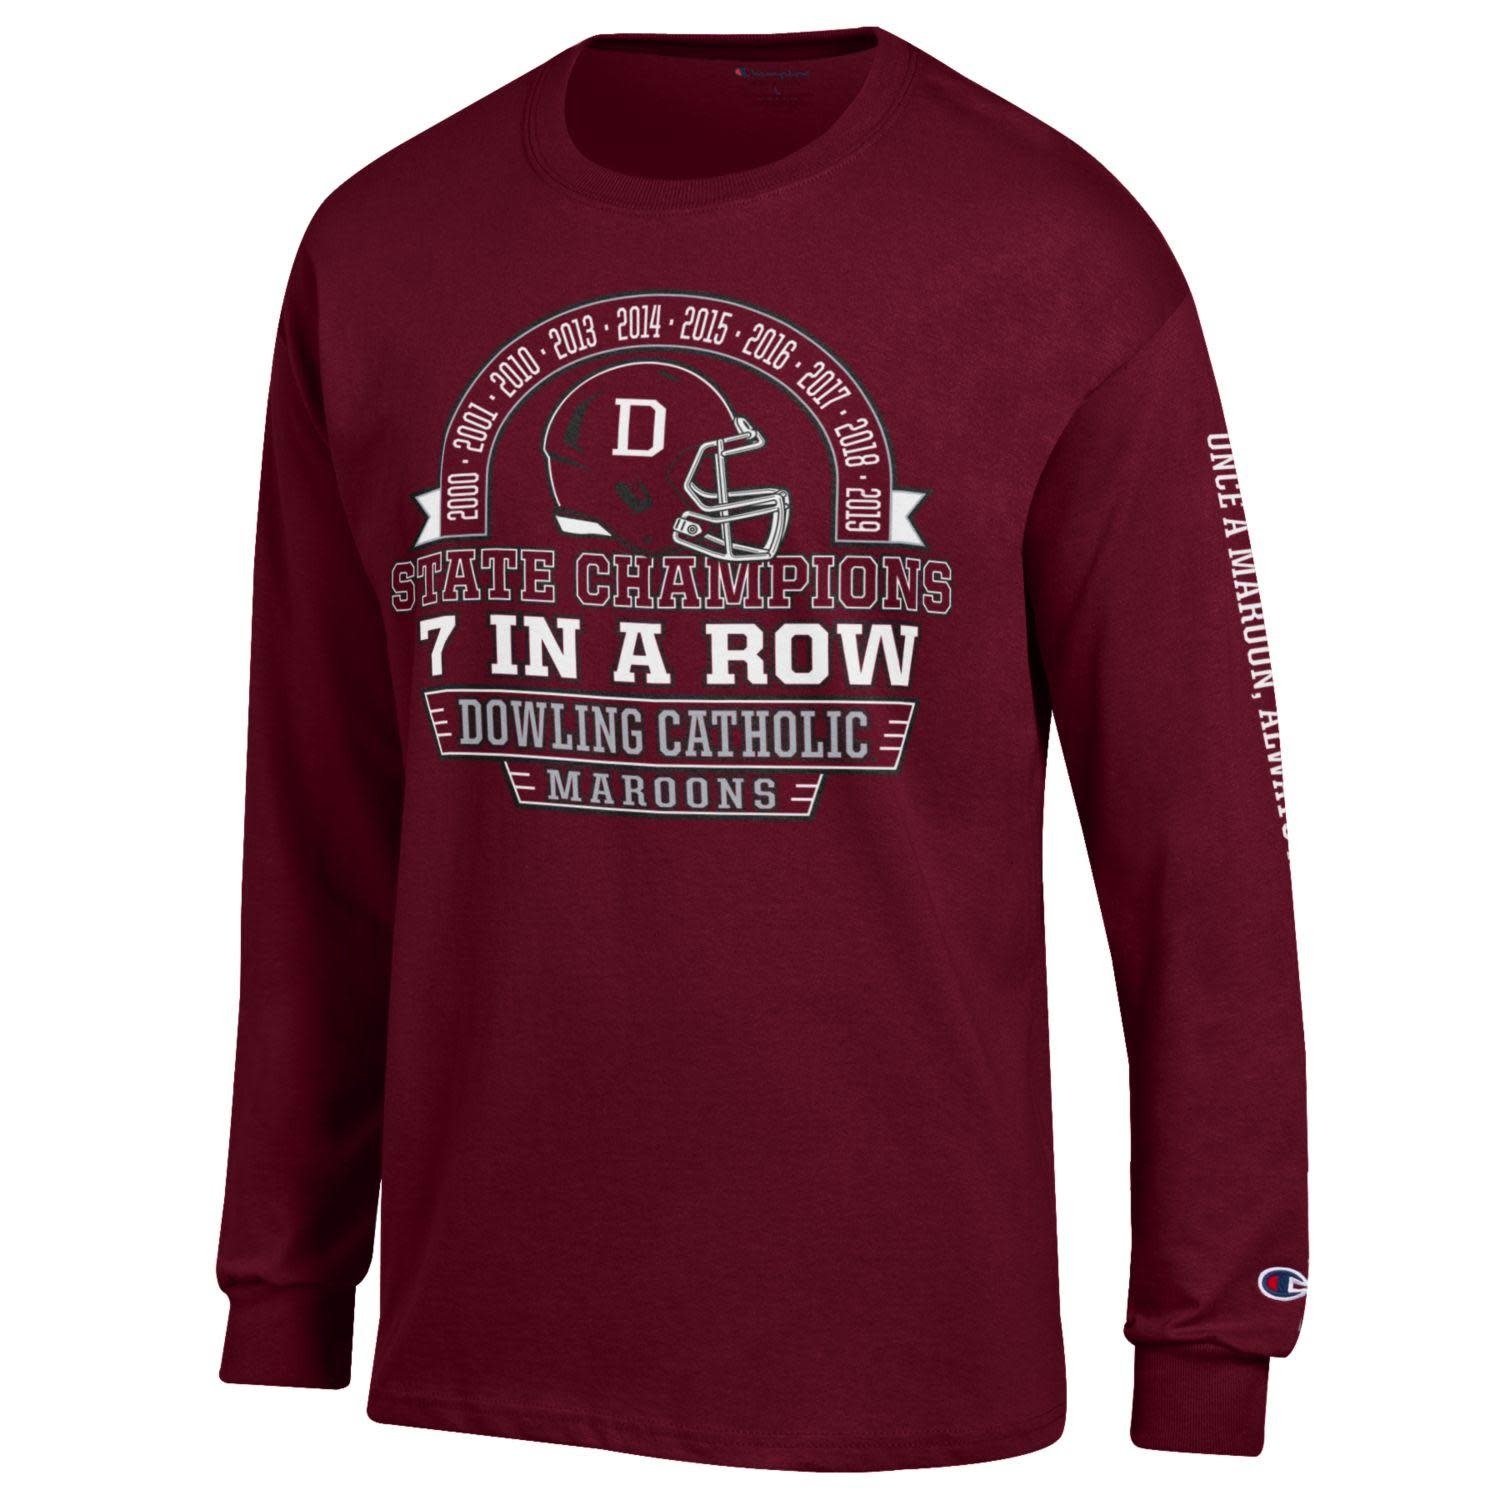 Champion Jersey Long Sleeve Tee 2020 - Dowling Catholic Campus Store